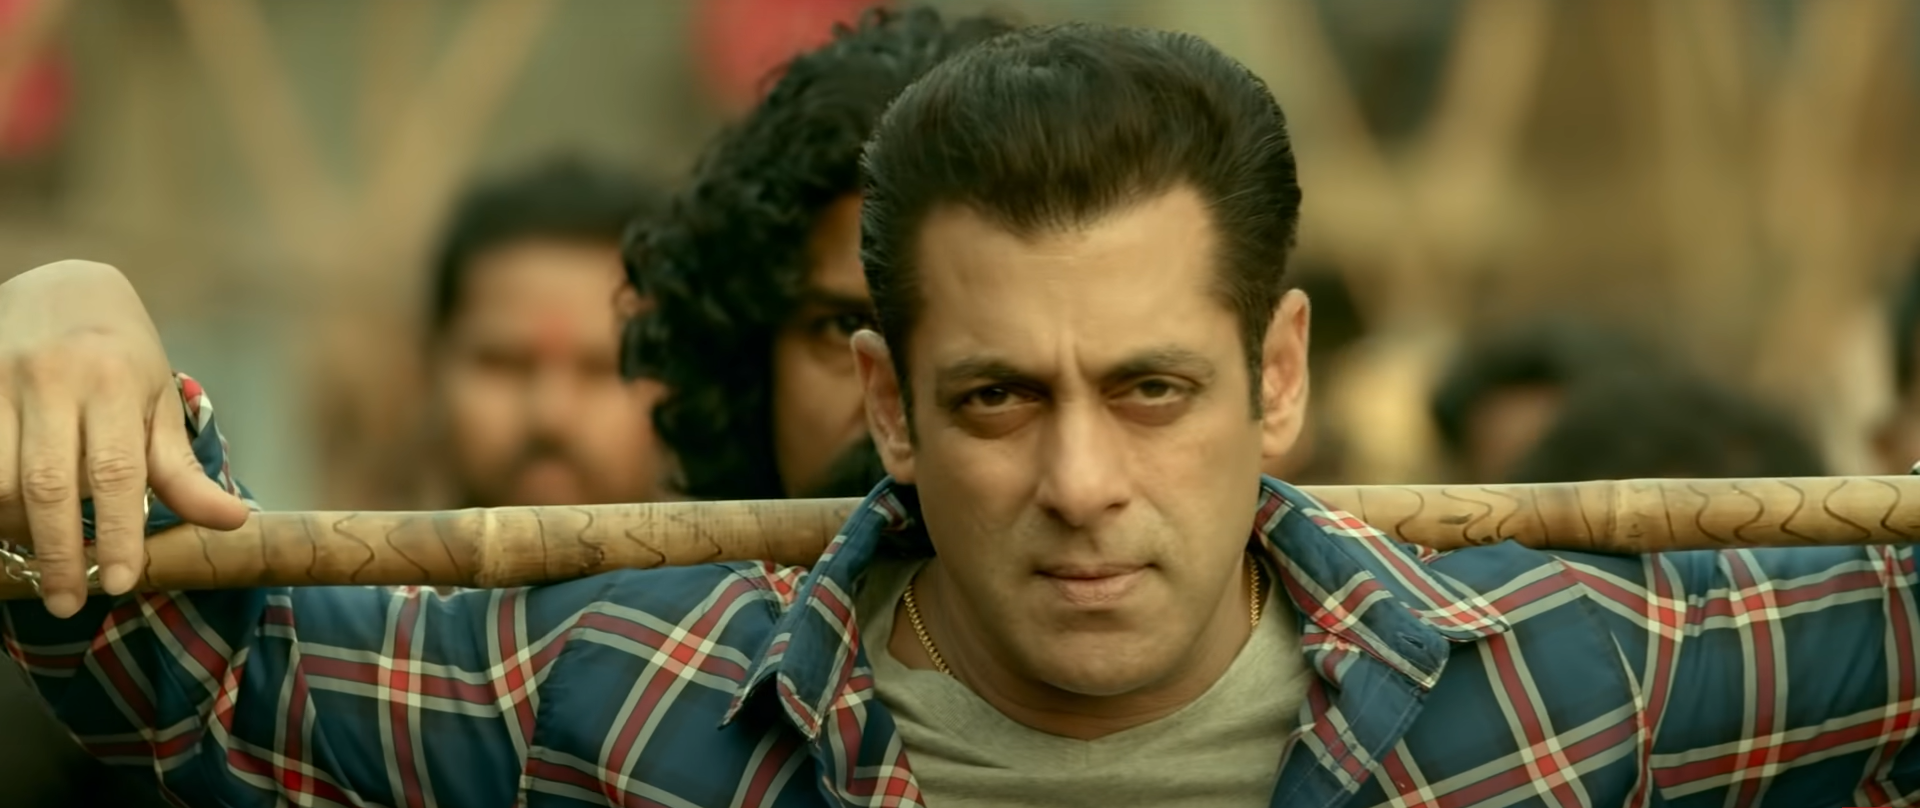 Salman Khan holding a stick over his shoulders with a determined look on his face